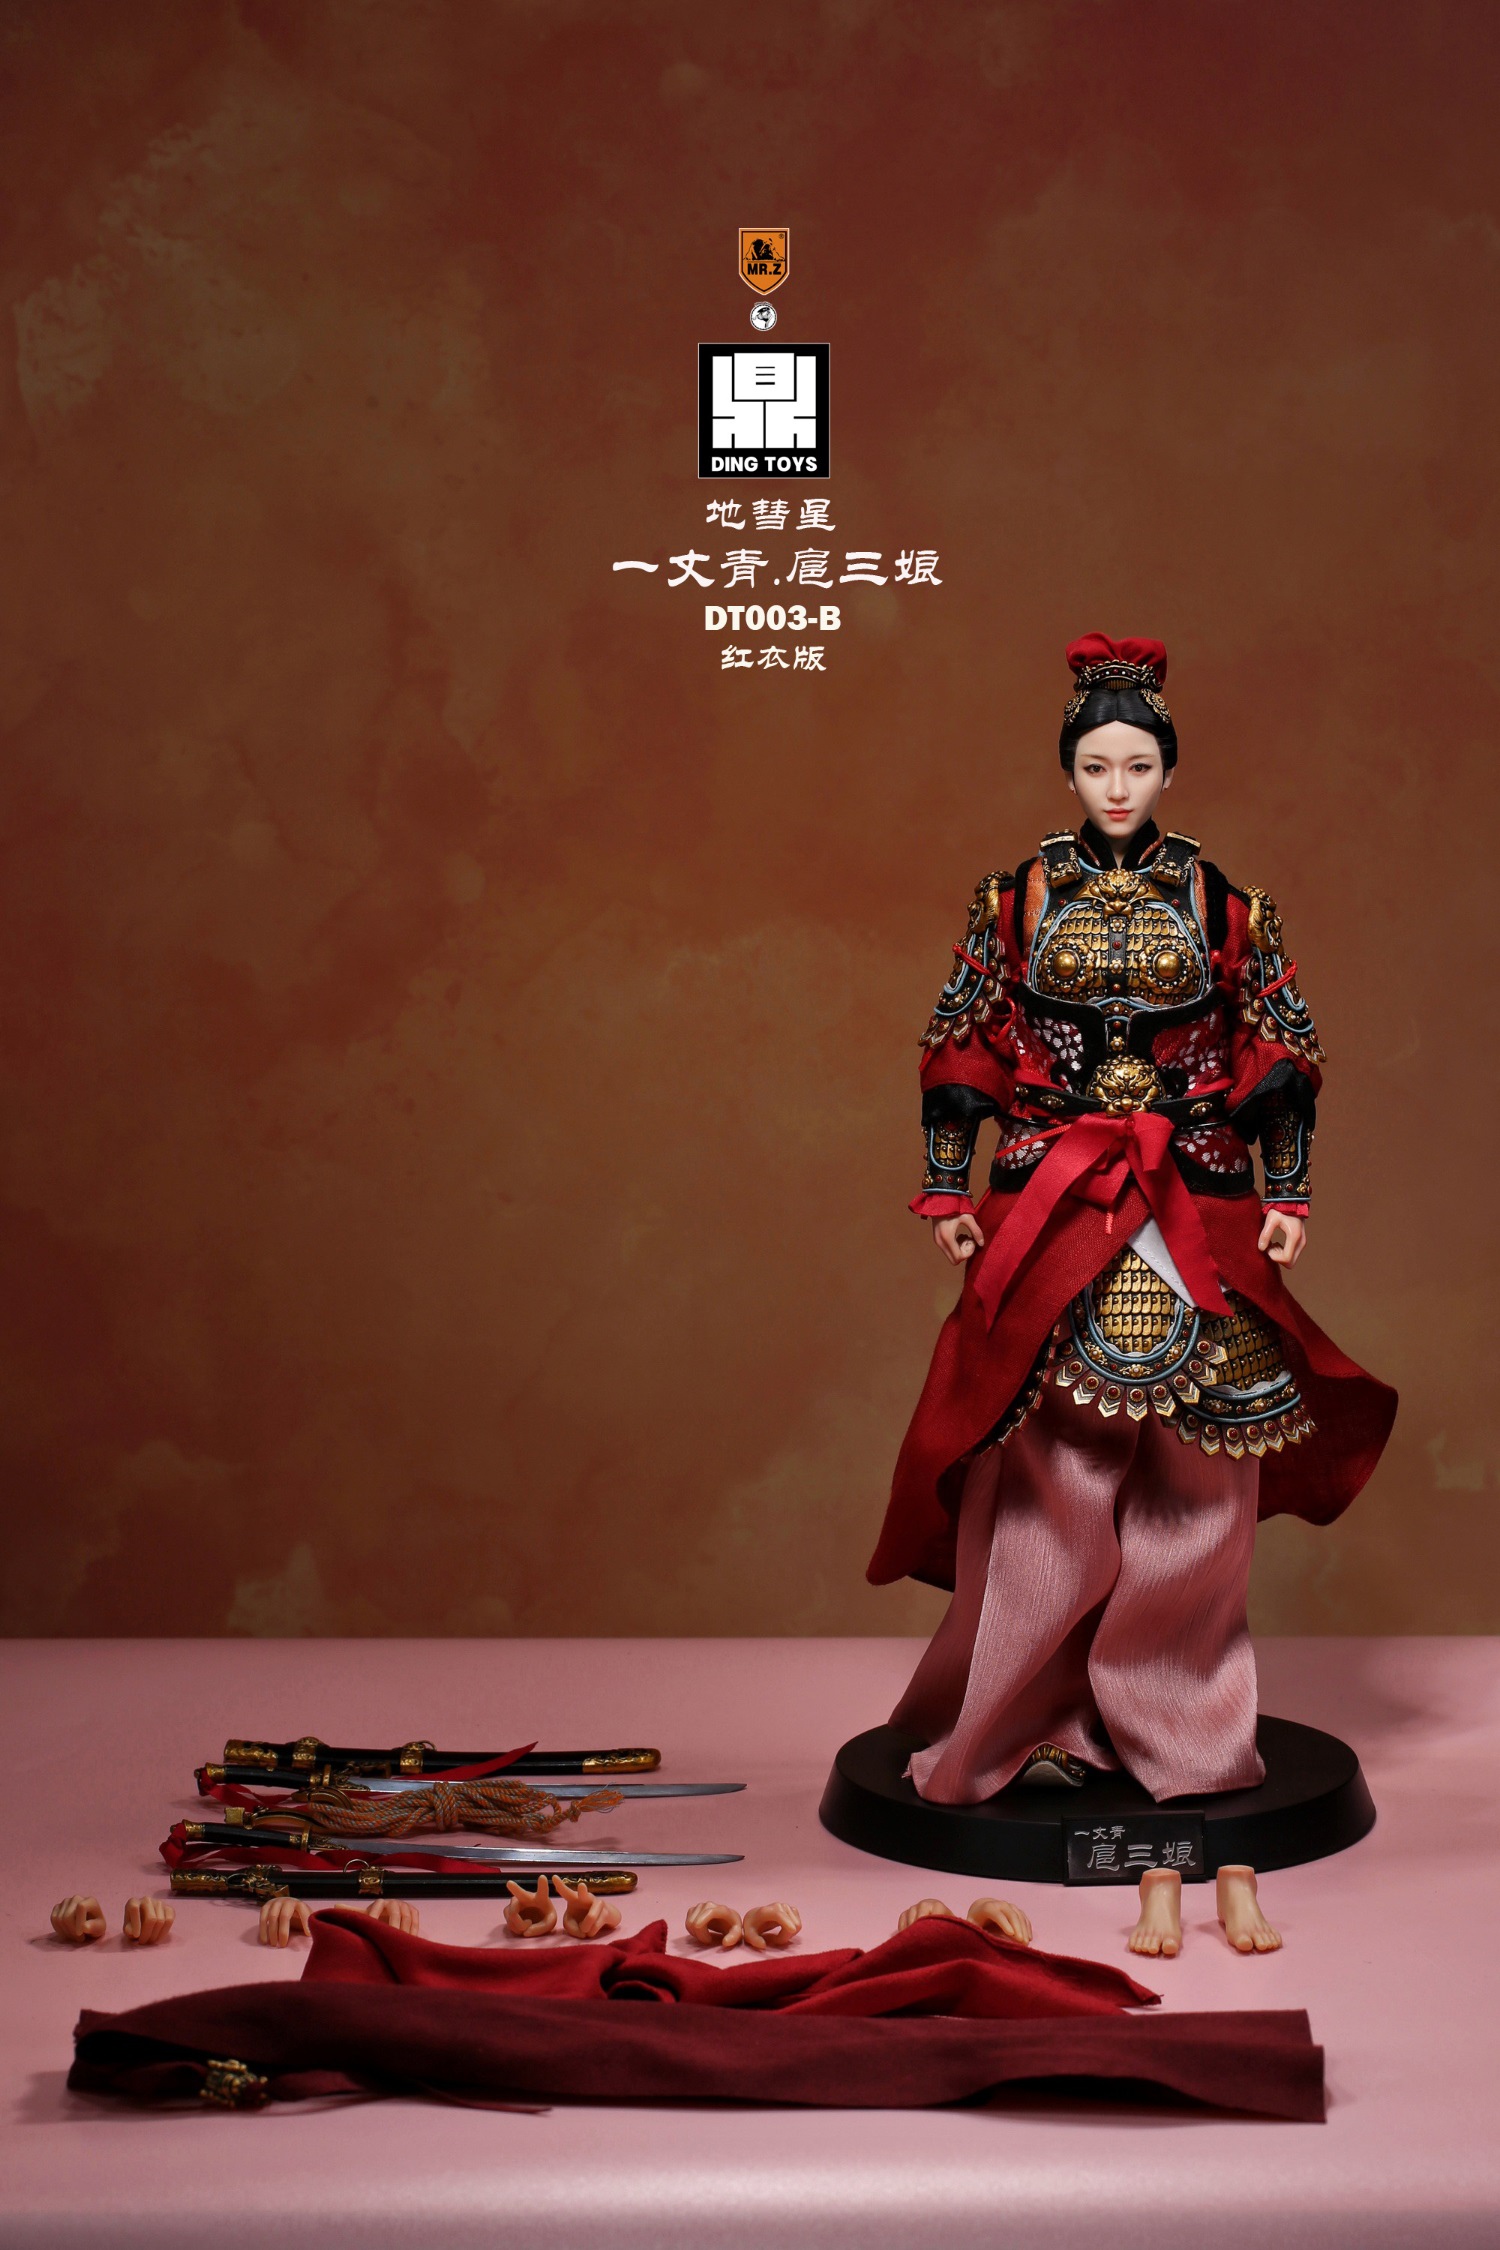 NEW PRODUCT: Mr.Z x Ding Toys DT003 1/6 Scale 《Water Margin》Shiying Zhang (Green and Red versions), Horse (White) 4718